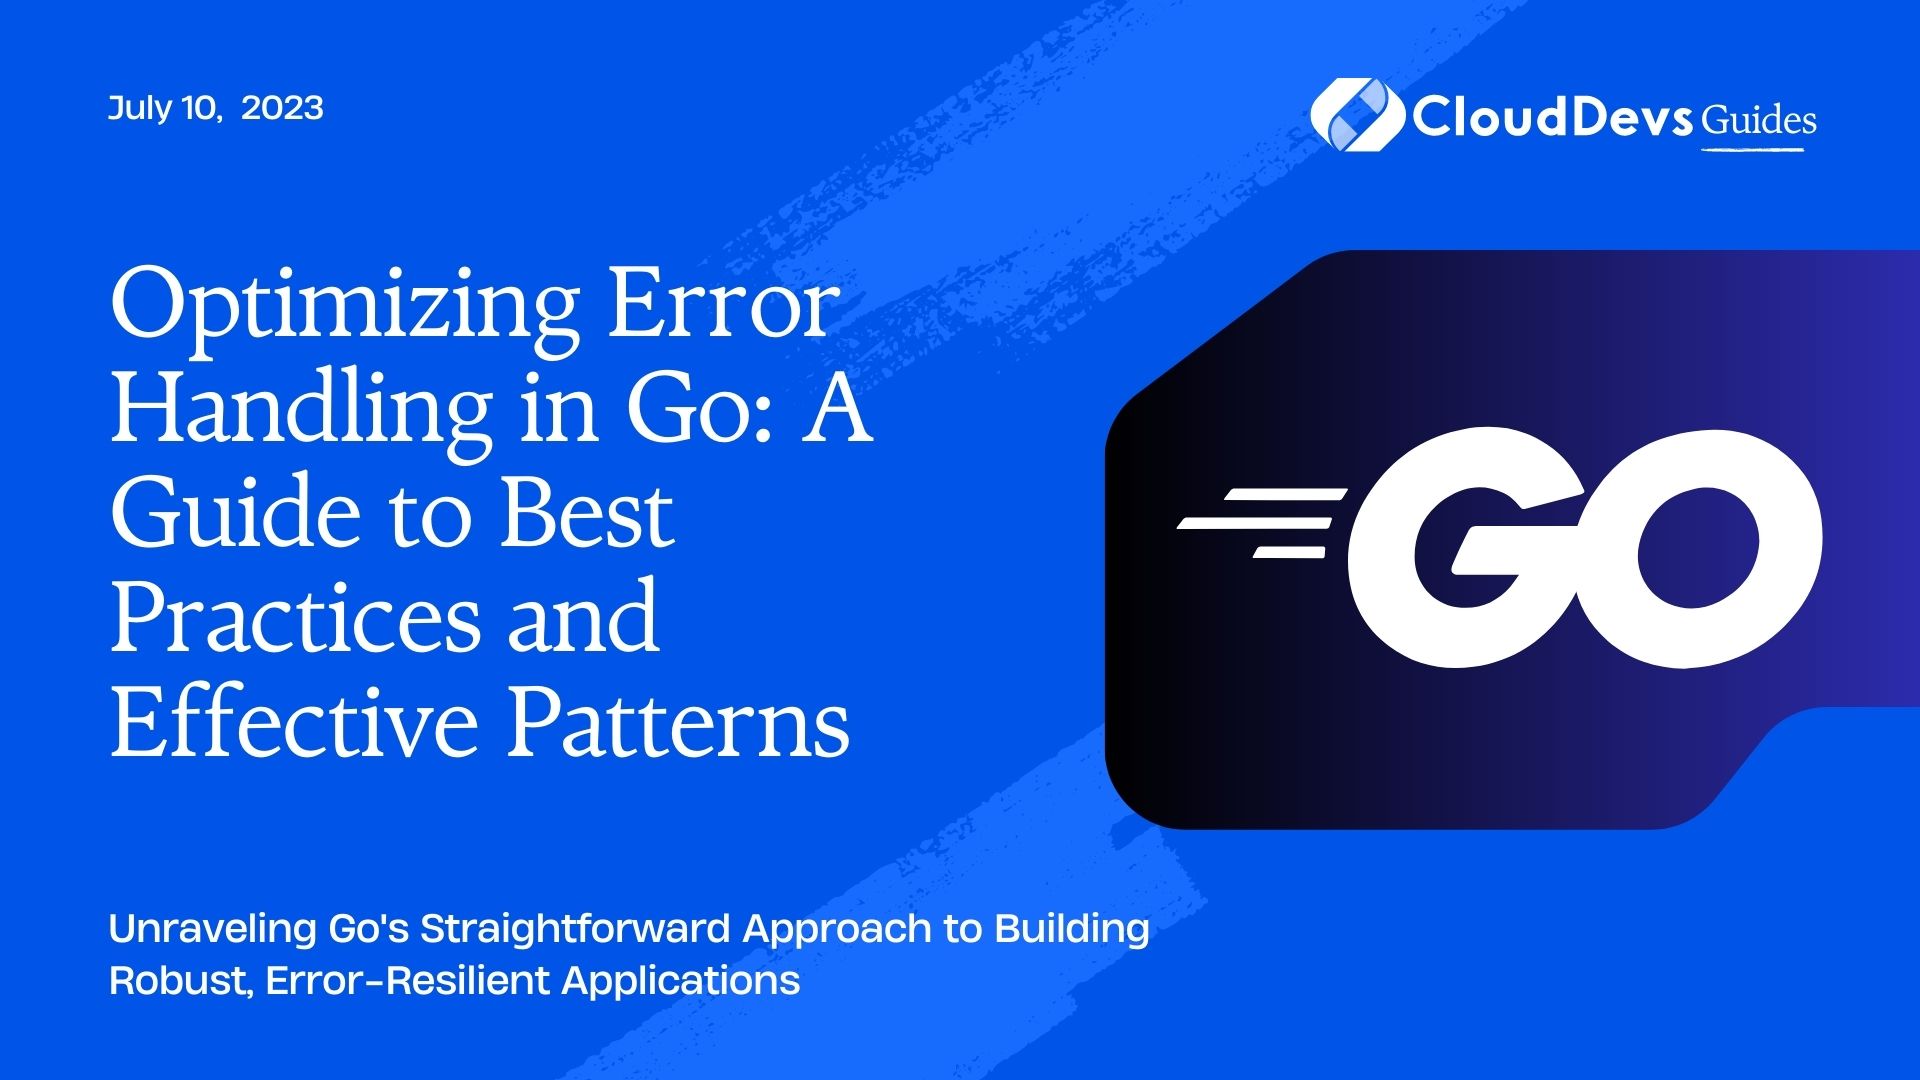 Optimizing Error Handling in Go: A Guide to Best Practices and Effective Patterns